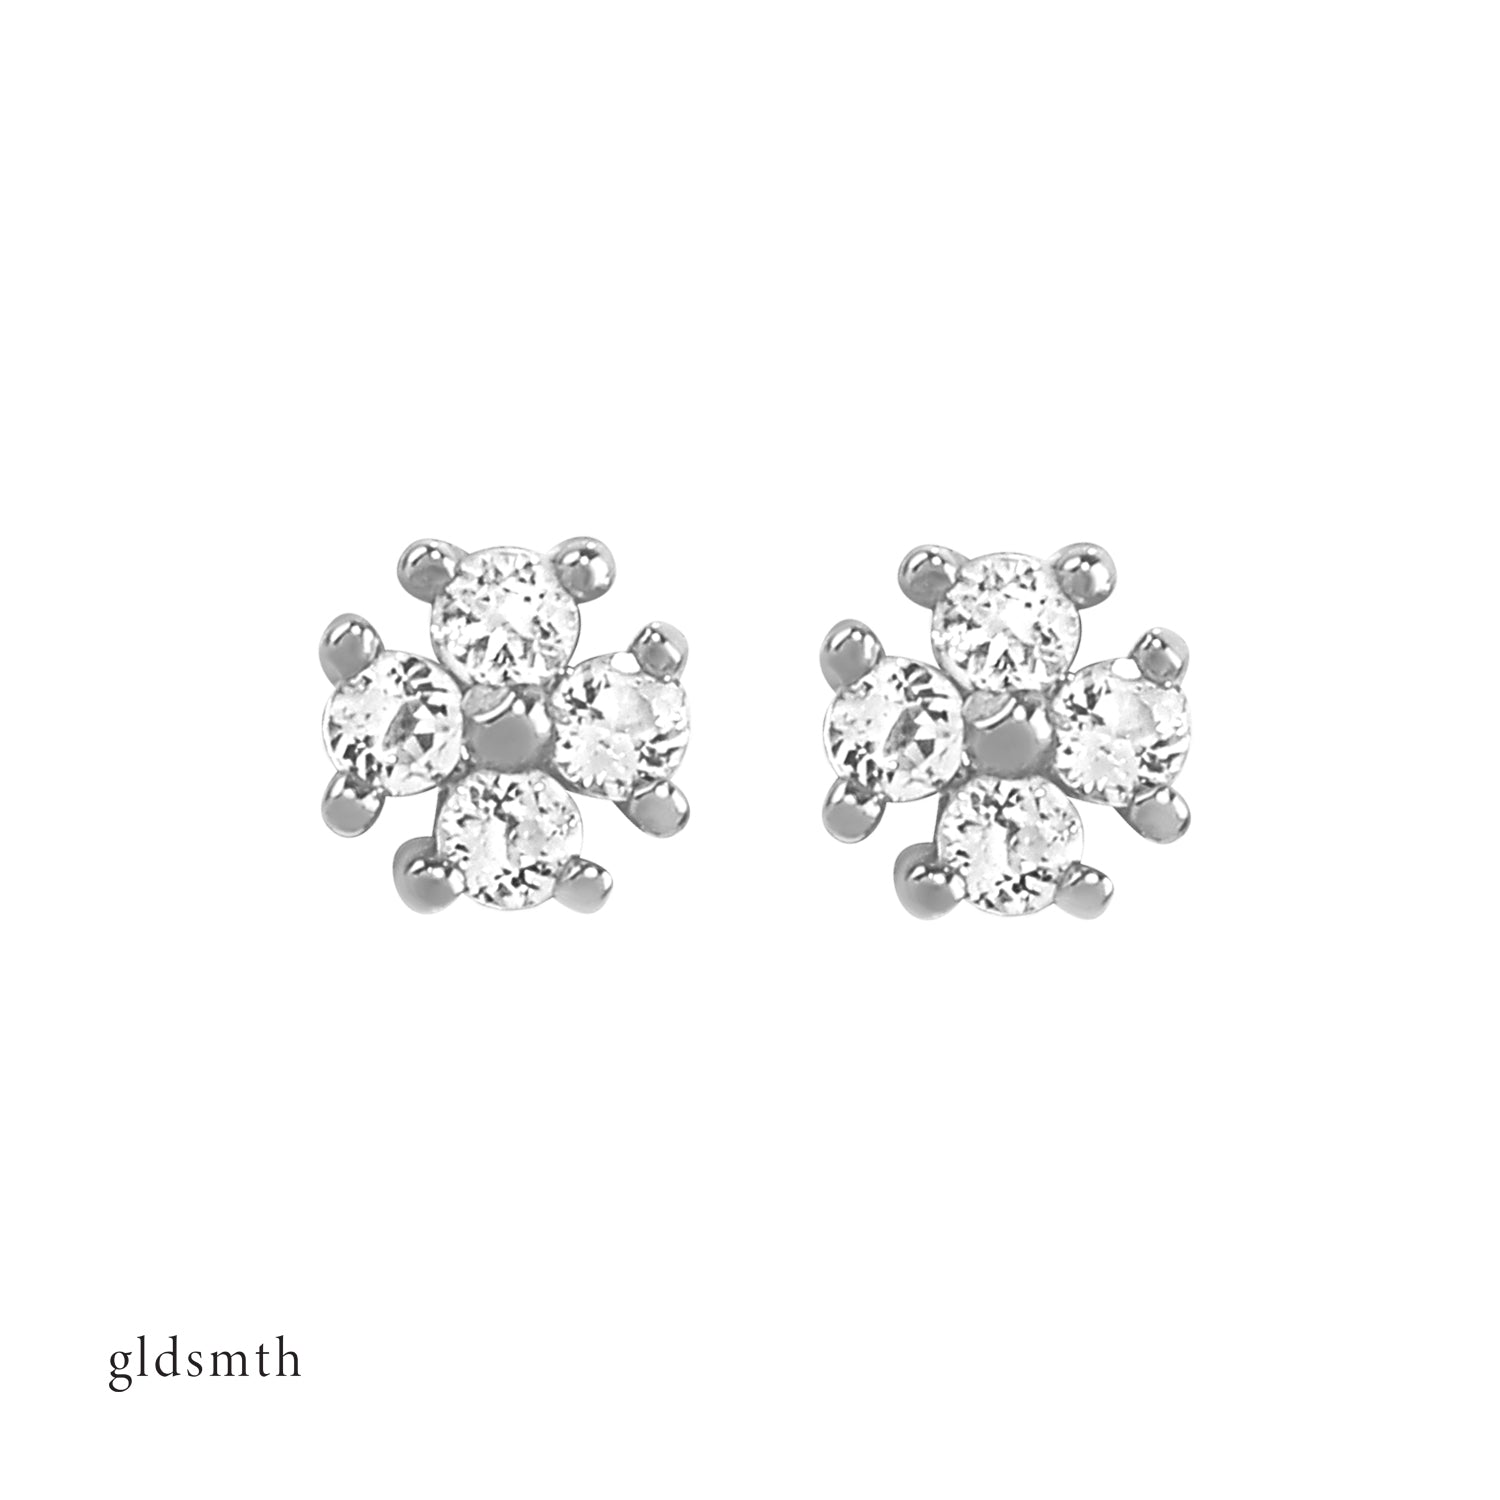 Elegant and fine earrings. Handcrafted 14k solid white gold studs with white topazes.